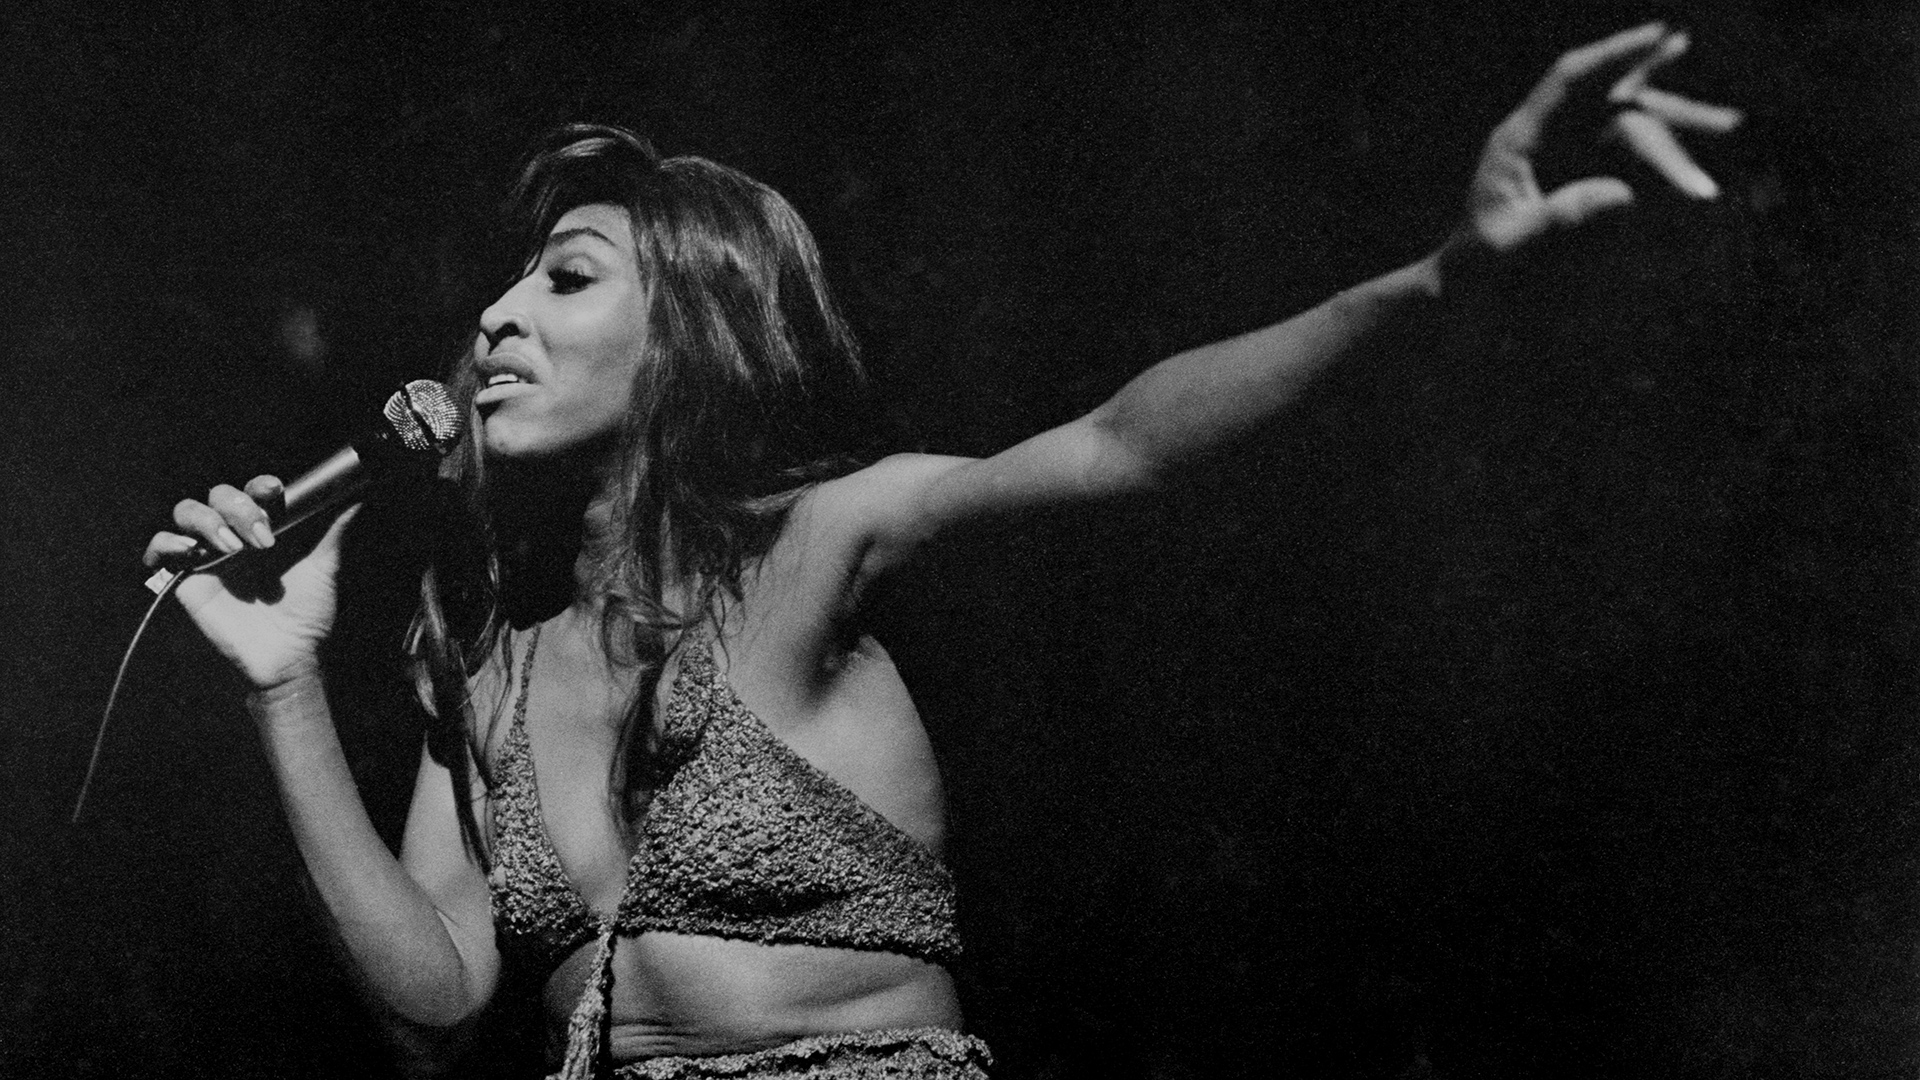 This never-before-published photograph shows Tina Turner 